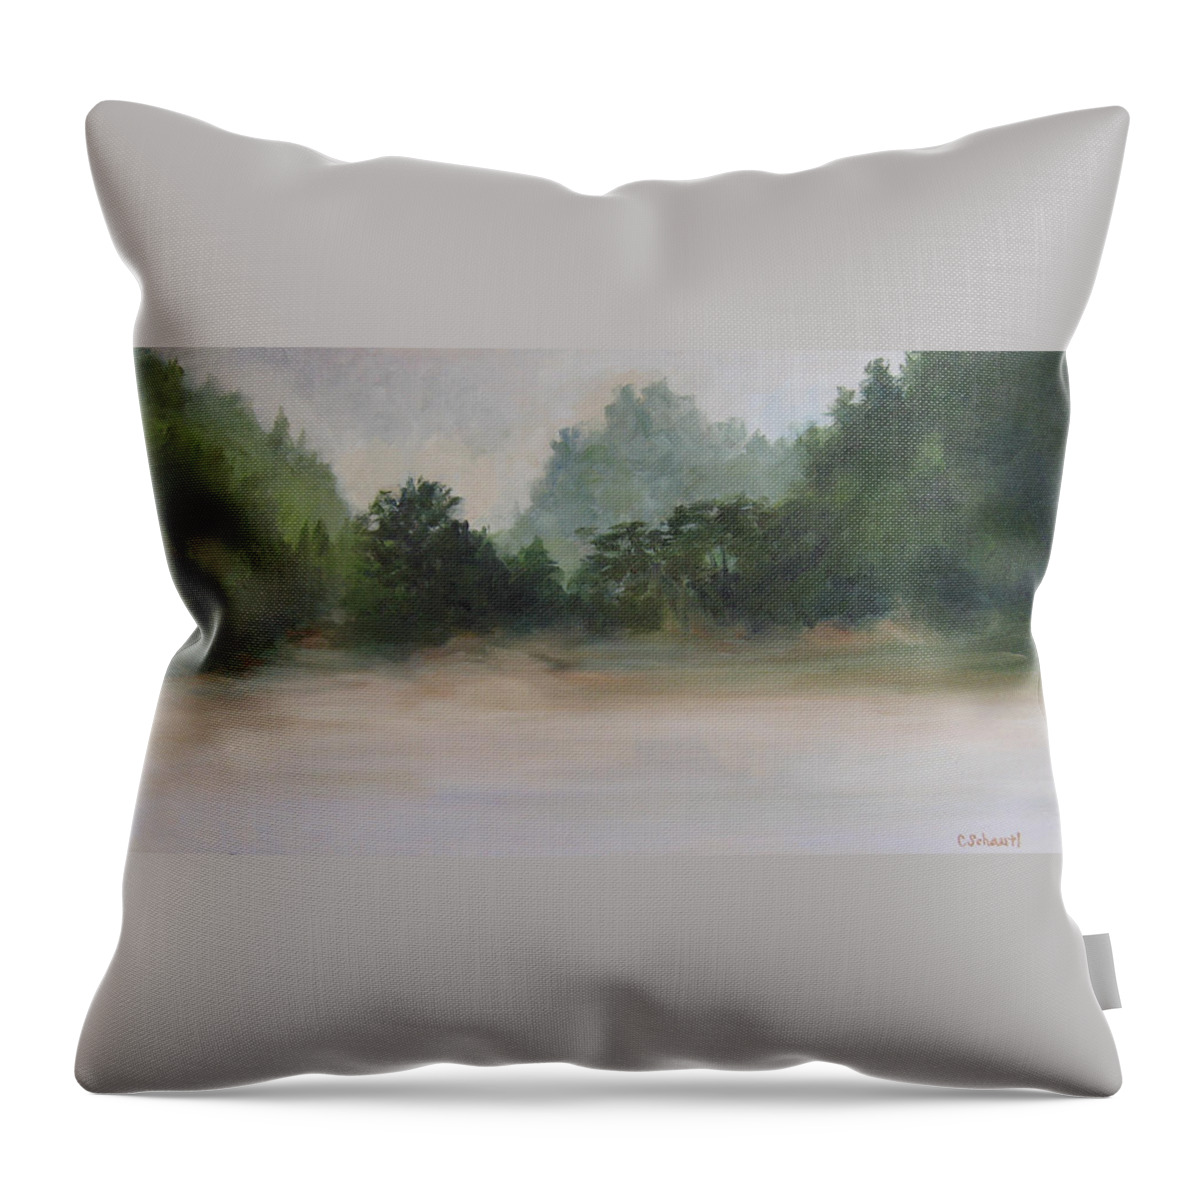 Landscape Throw Pillow featuring the painting Ground Mist by Connie Schaertl